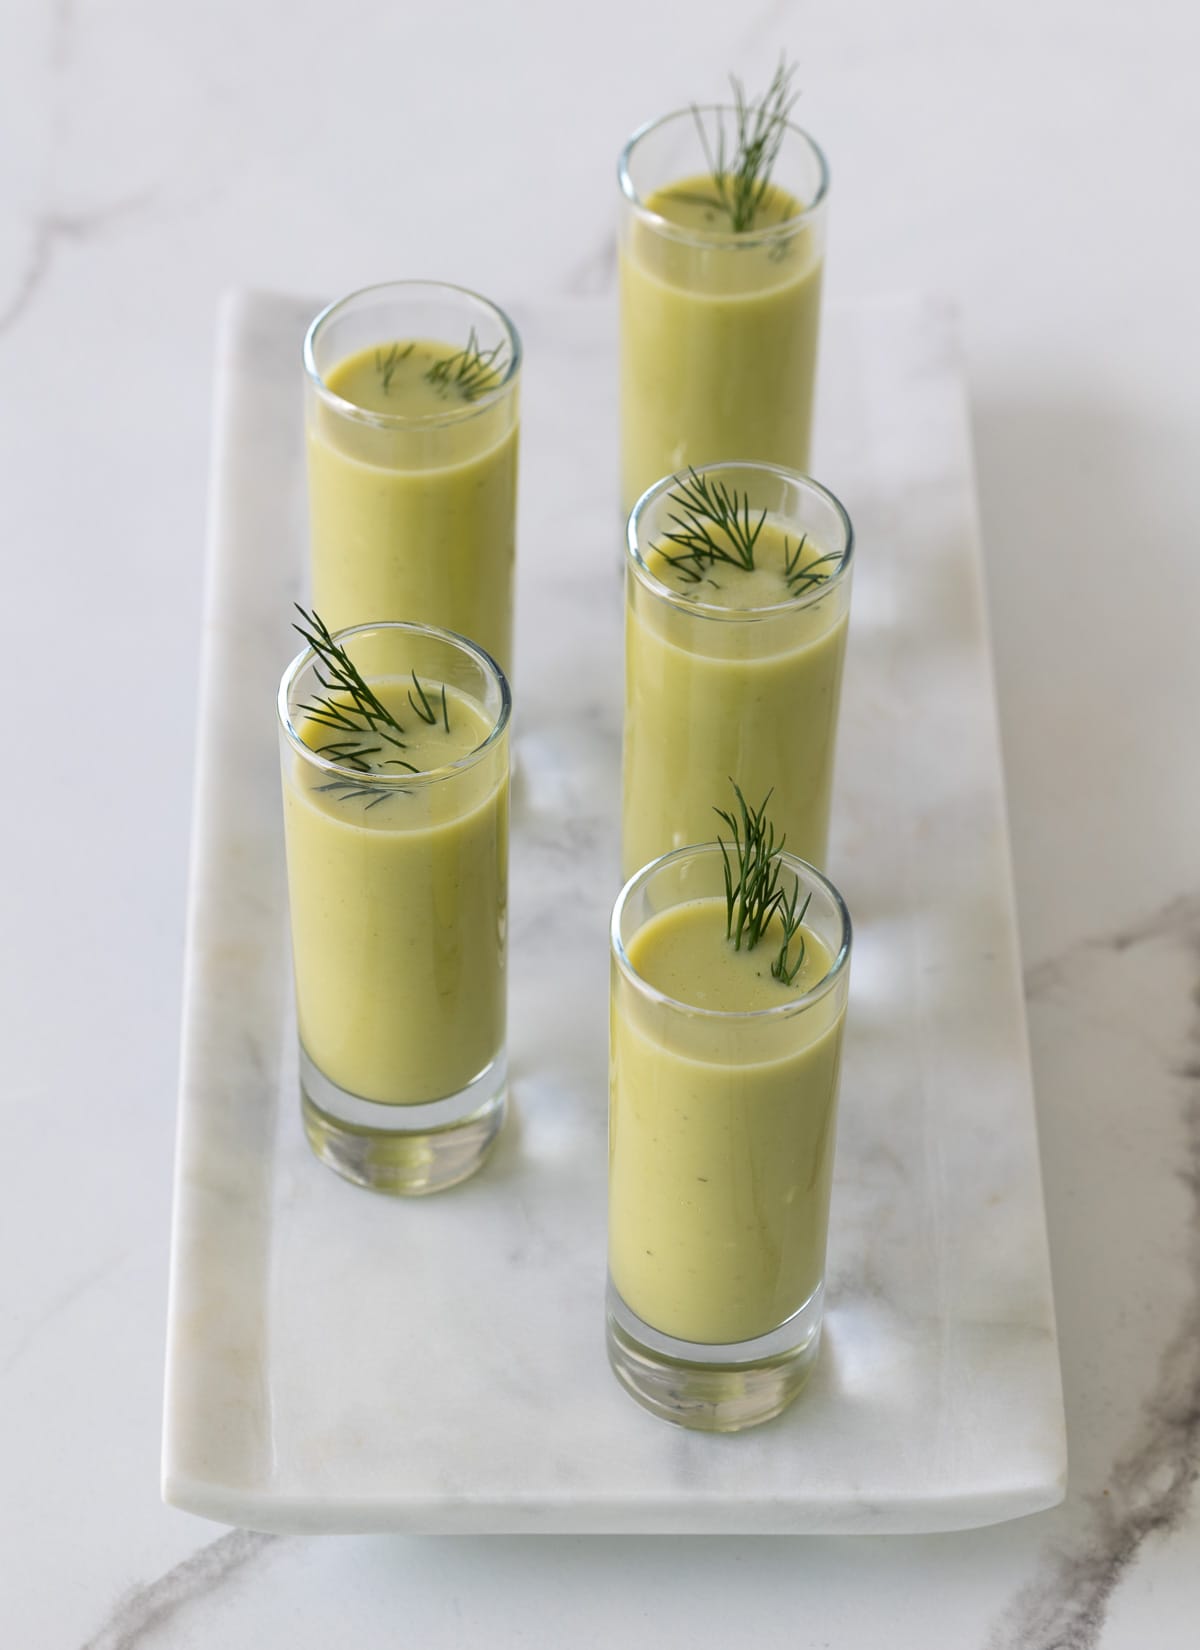 Asparagus sou shooters for appetizers. 